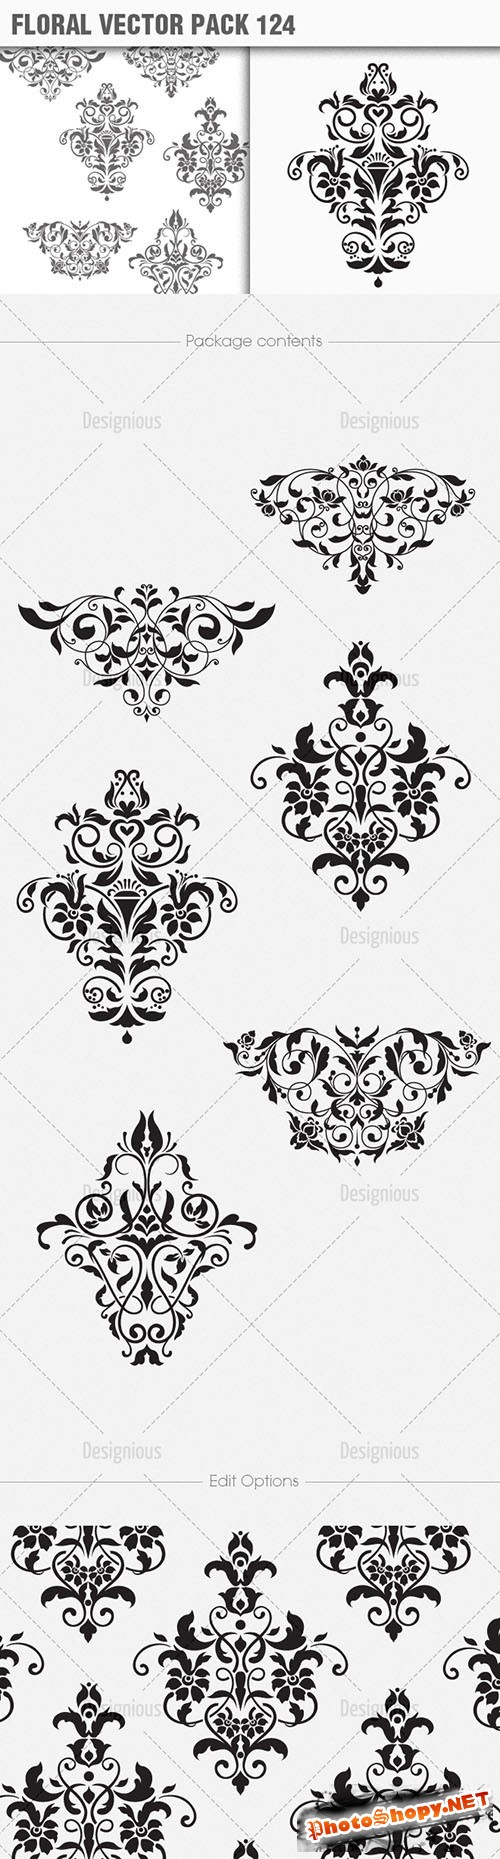 Floral Vector Pack 124